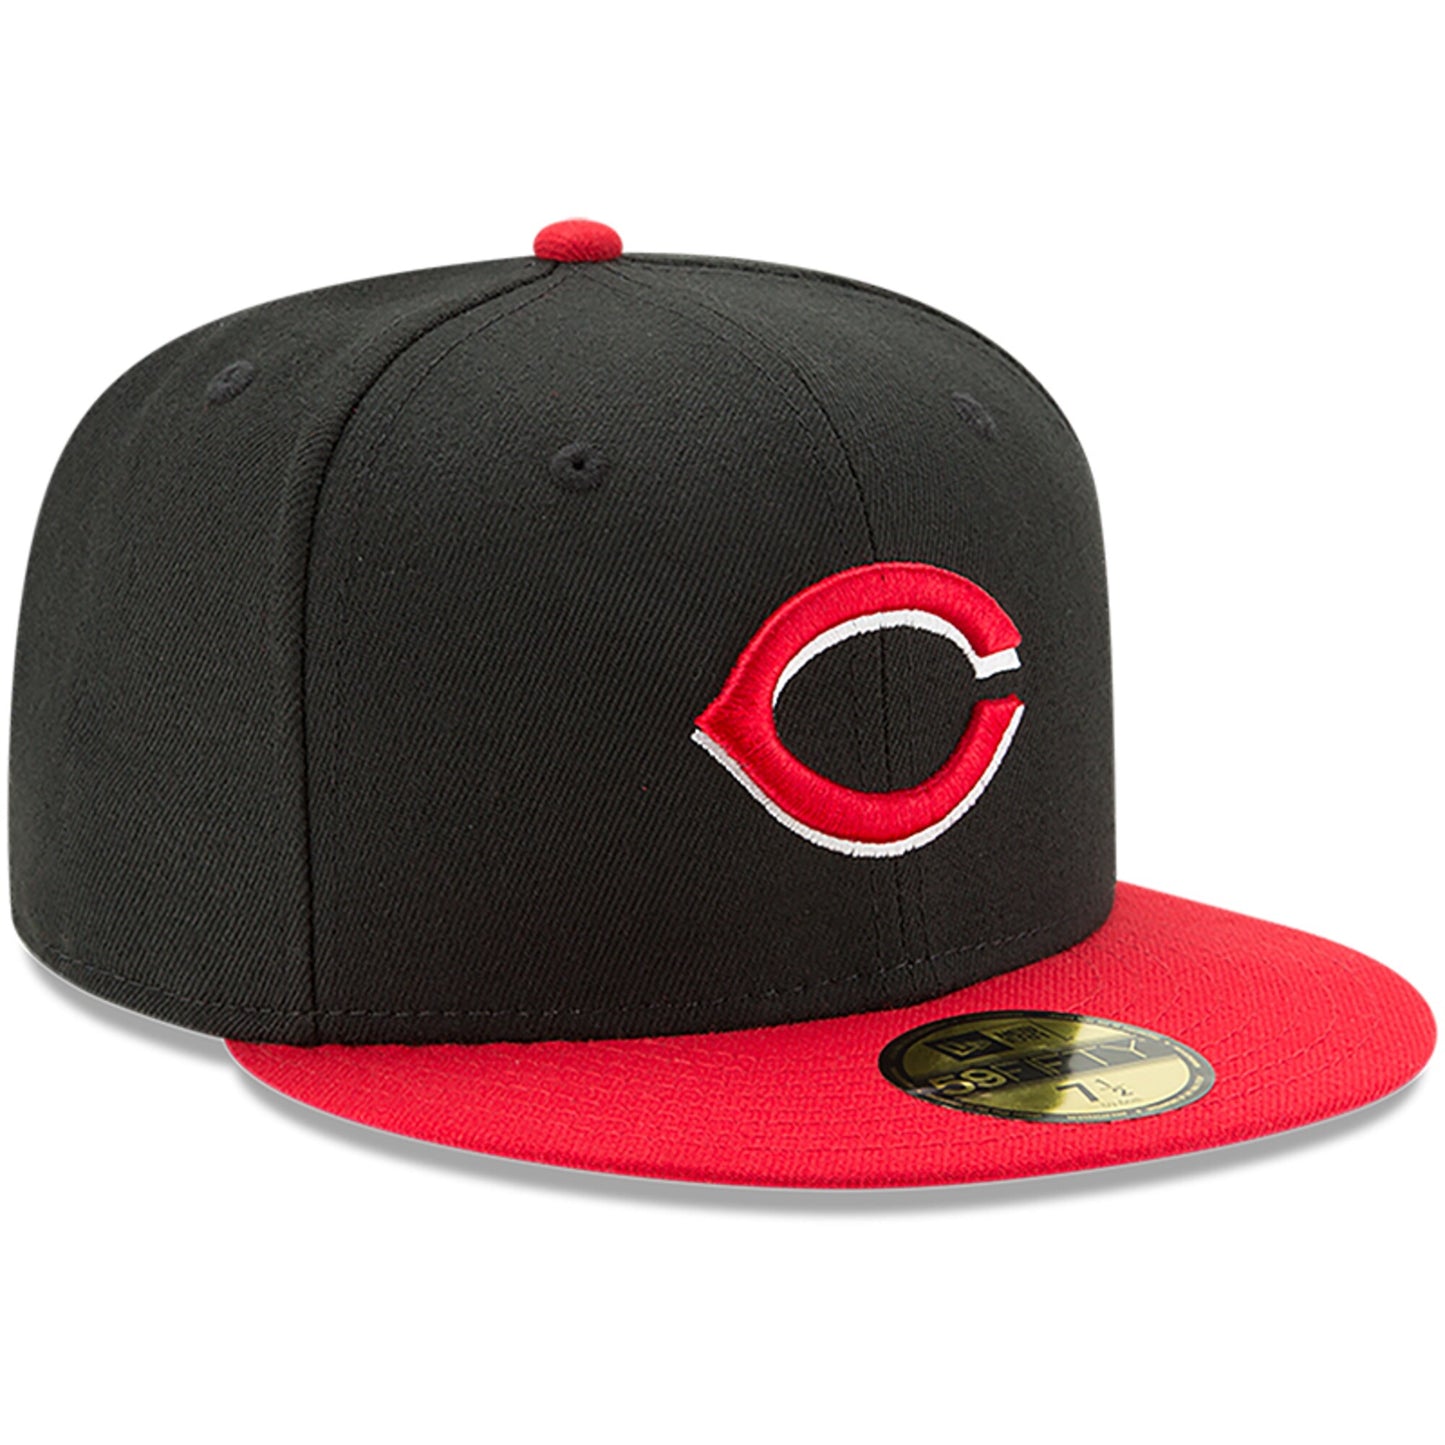 Men's Cincinnati Reds New Era Black/Red Alternate Authentic Collection On-Field 59FIFTY Fitted Hat